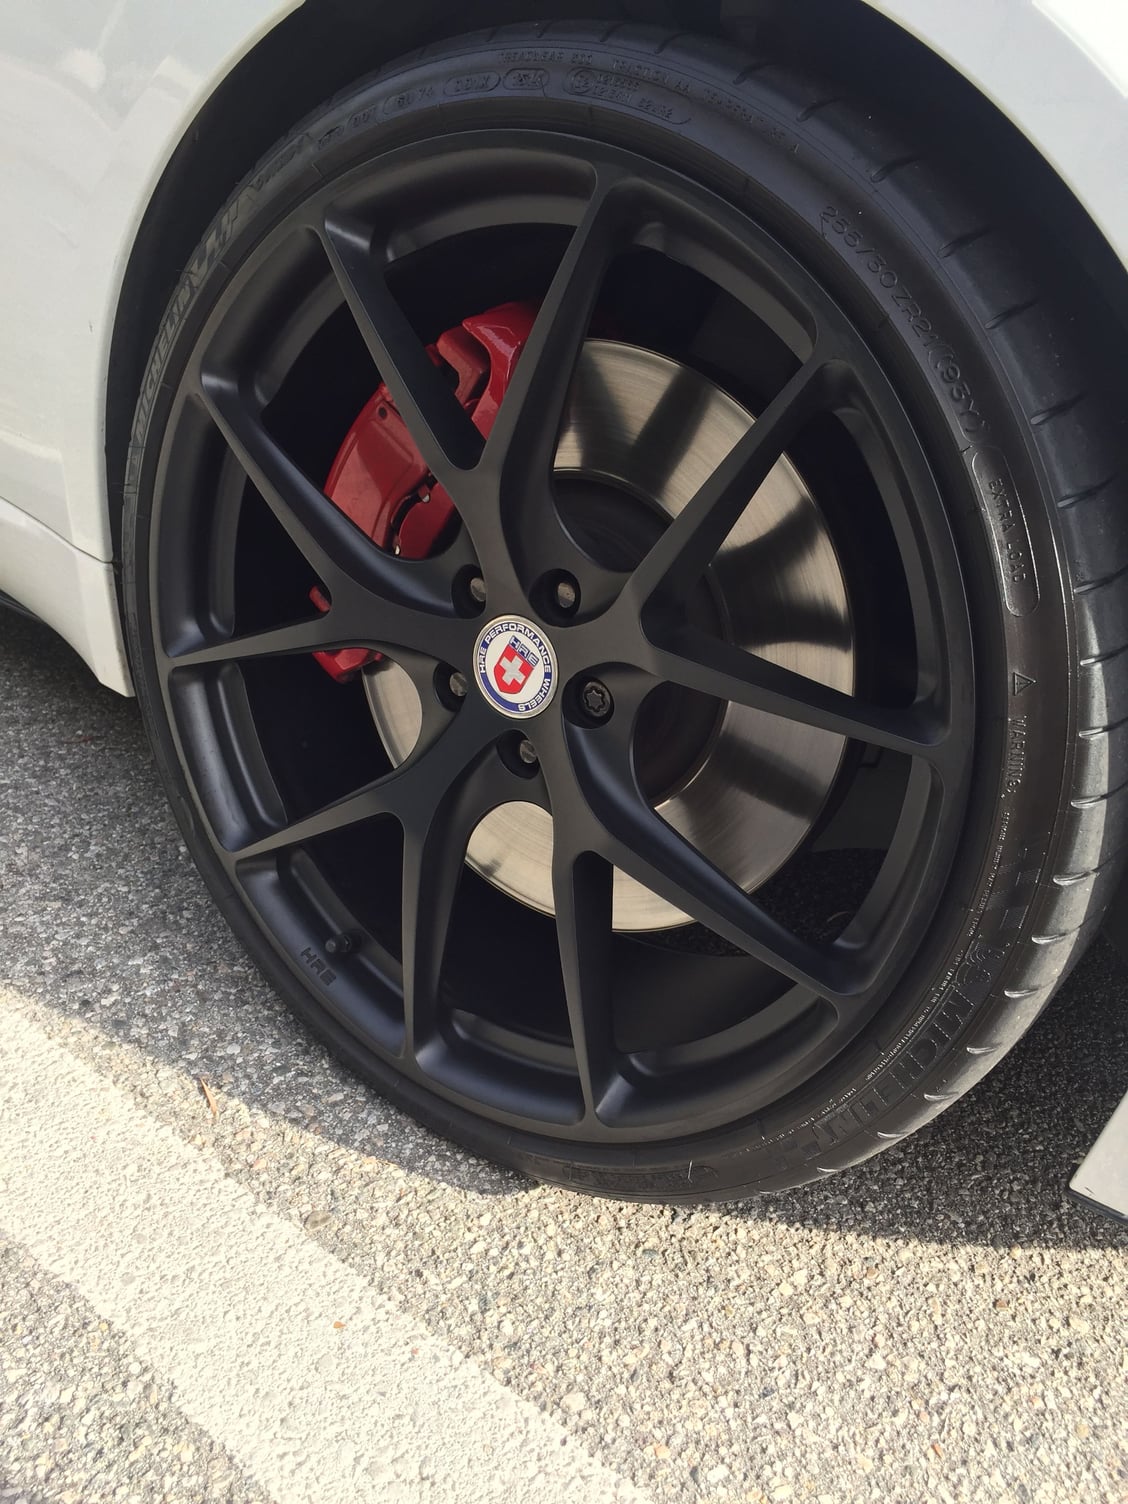 Wheels and Tires/Axles - FS: HRE P101 Black Forged 21" Wheels F-Type - Used - 2013 to 2019 Jaguar F-Type - Los Angeles, CA 91406, United States